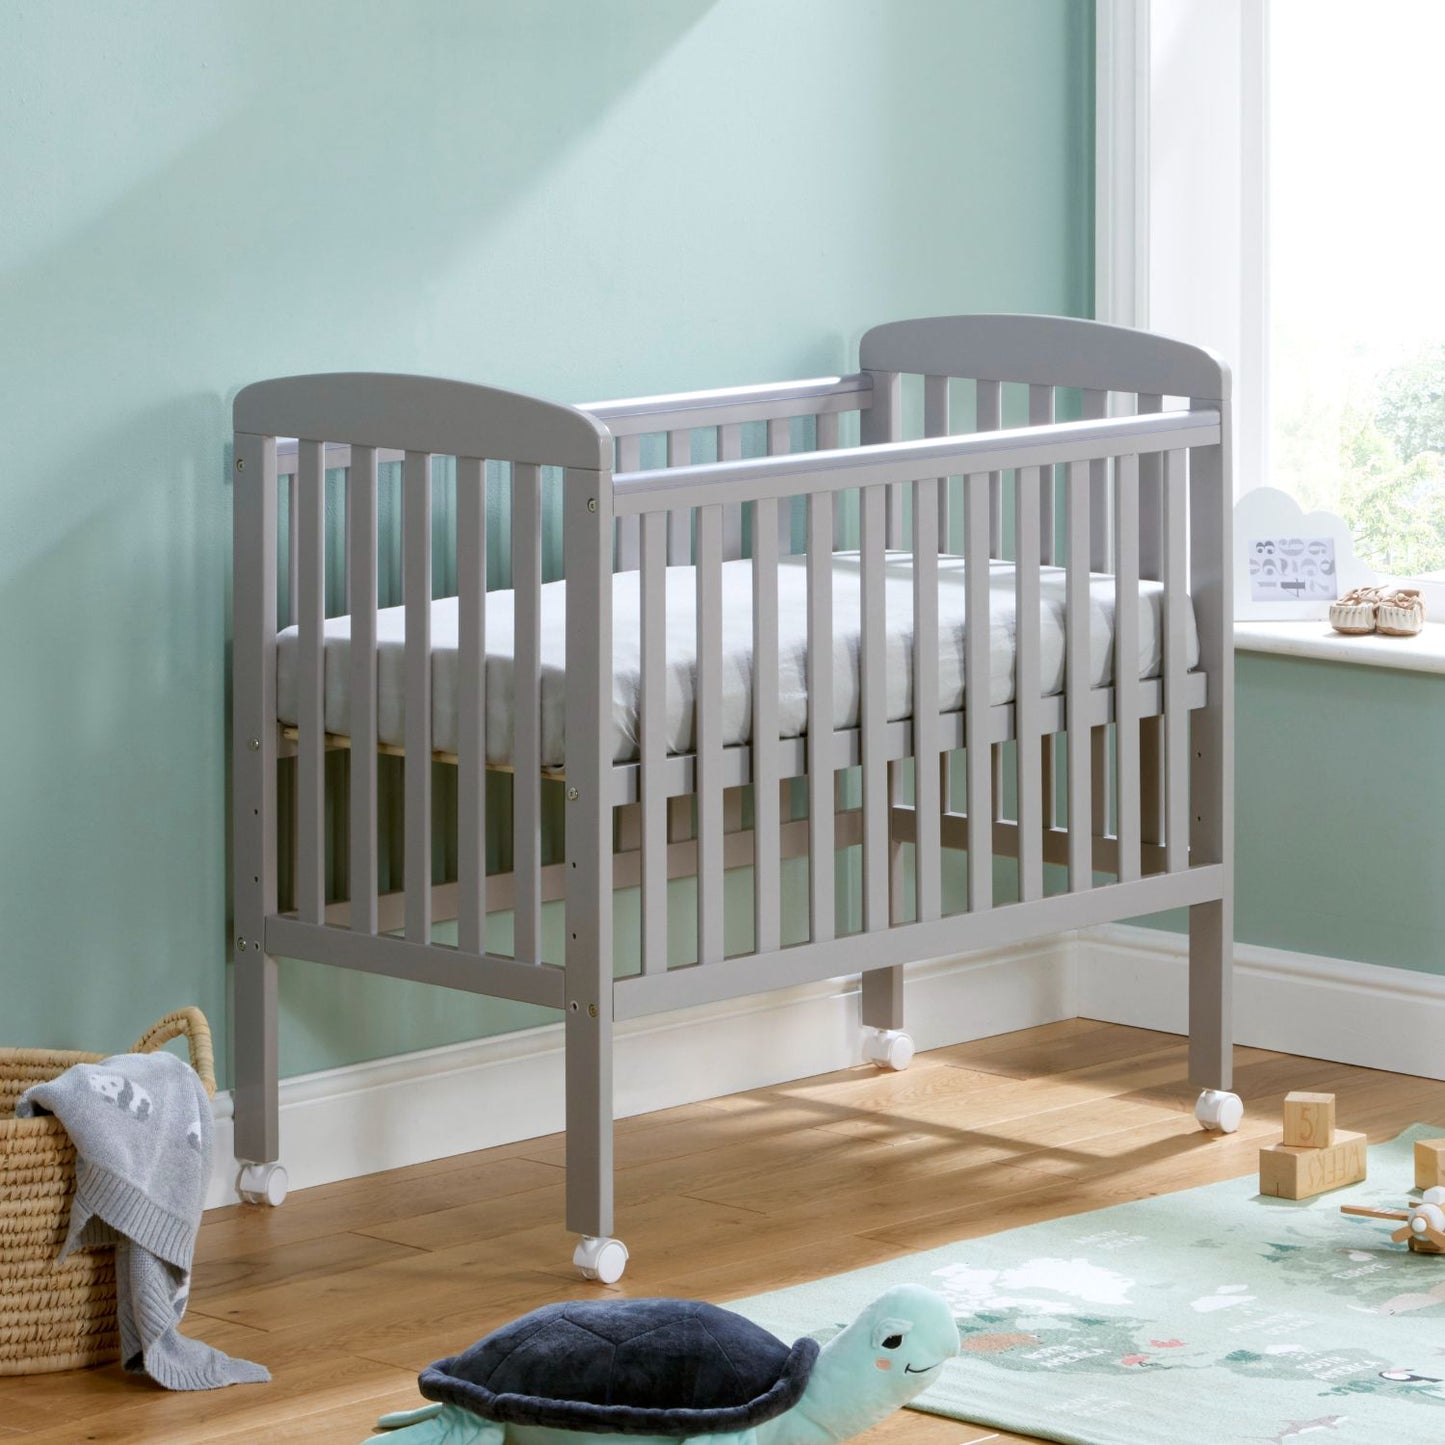 Babymore Space Saver Cot - Compact Size - Teething Rail (0-12months)